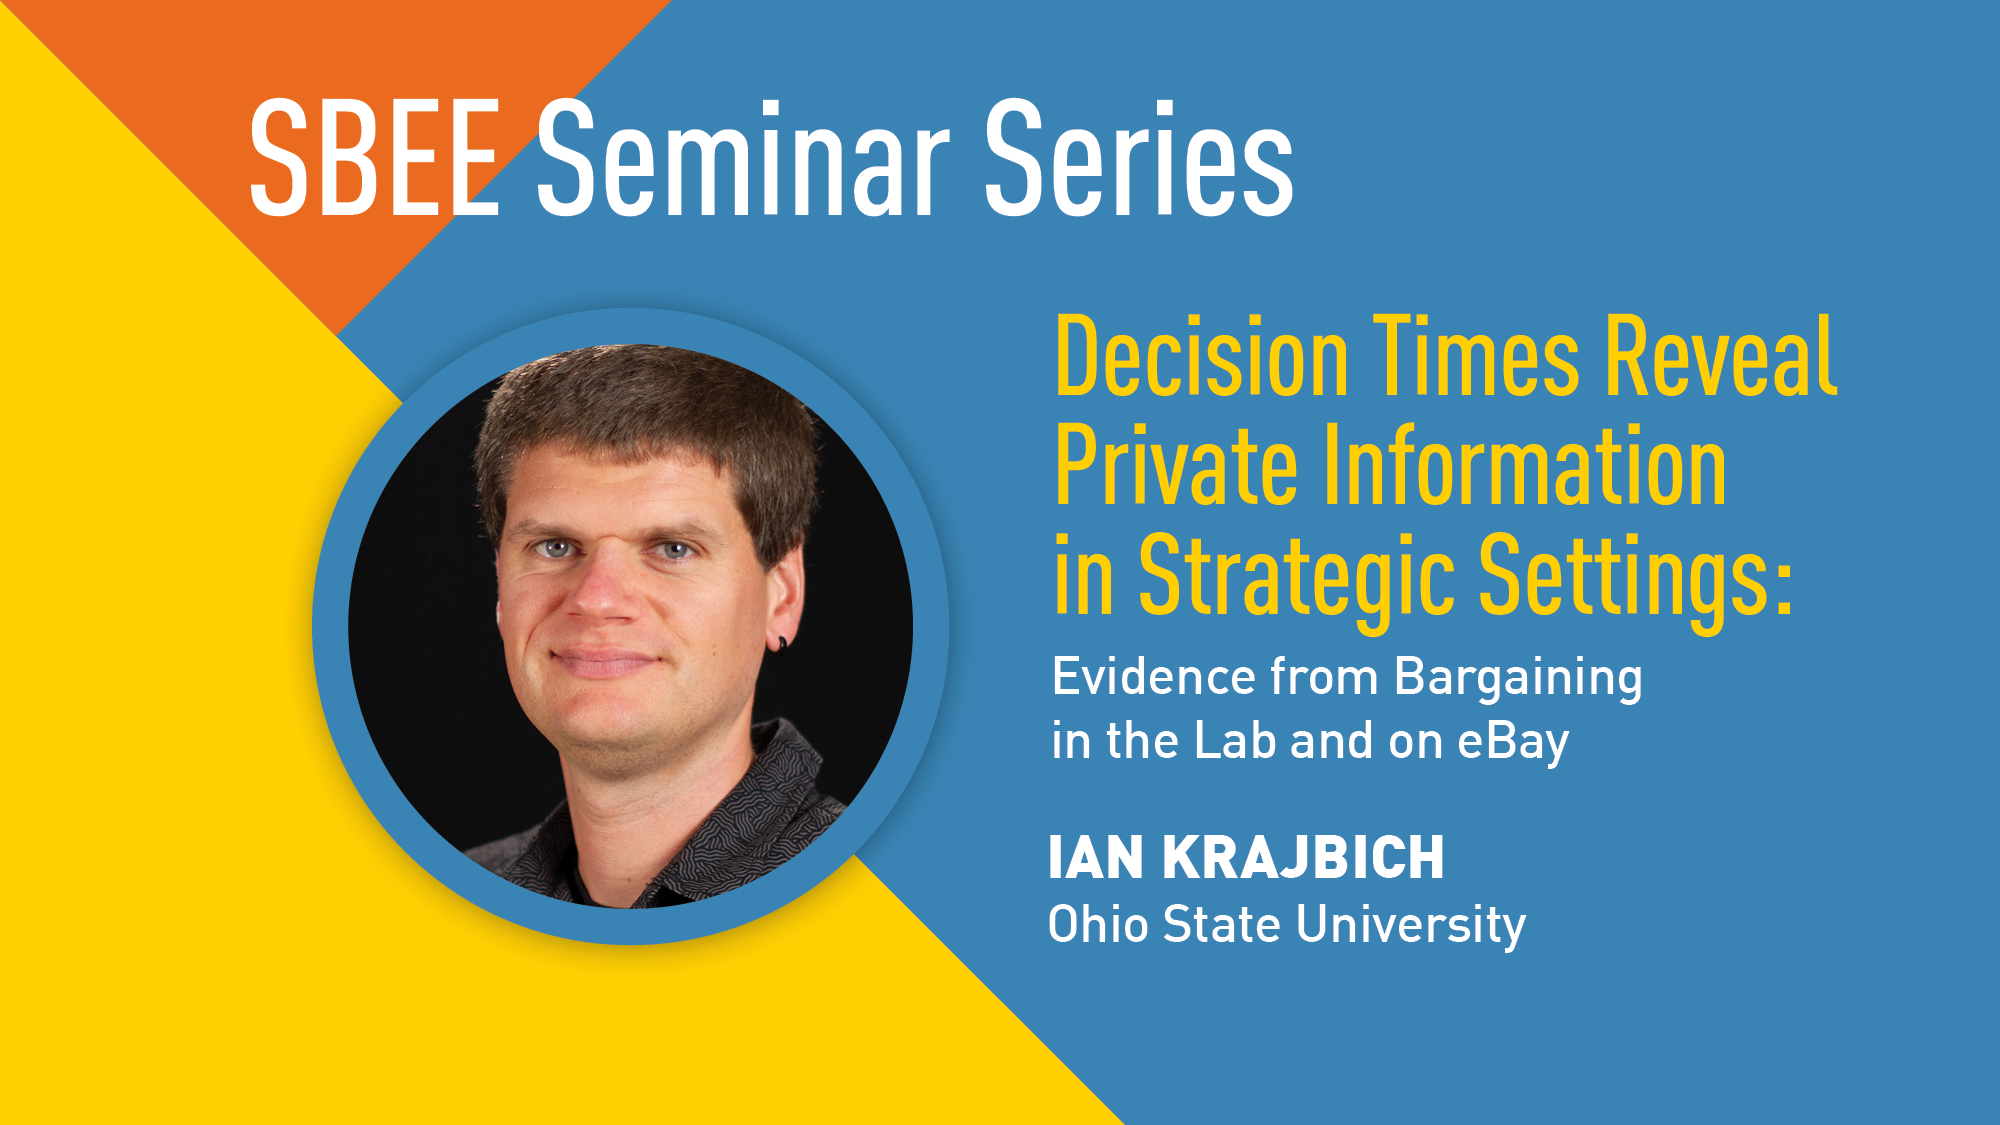 “SBEE Seminar Series.” Headshot of Ian Krajbich. “Decision Times Reveal Private Information in Strategic Settings: Evidence from Bargaining in the Lab and on eBay. Ian Krajbich. Ohio State University.” 